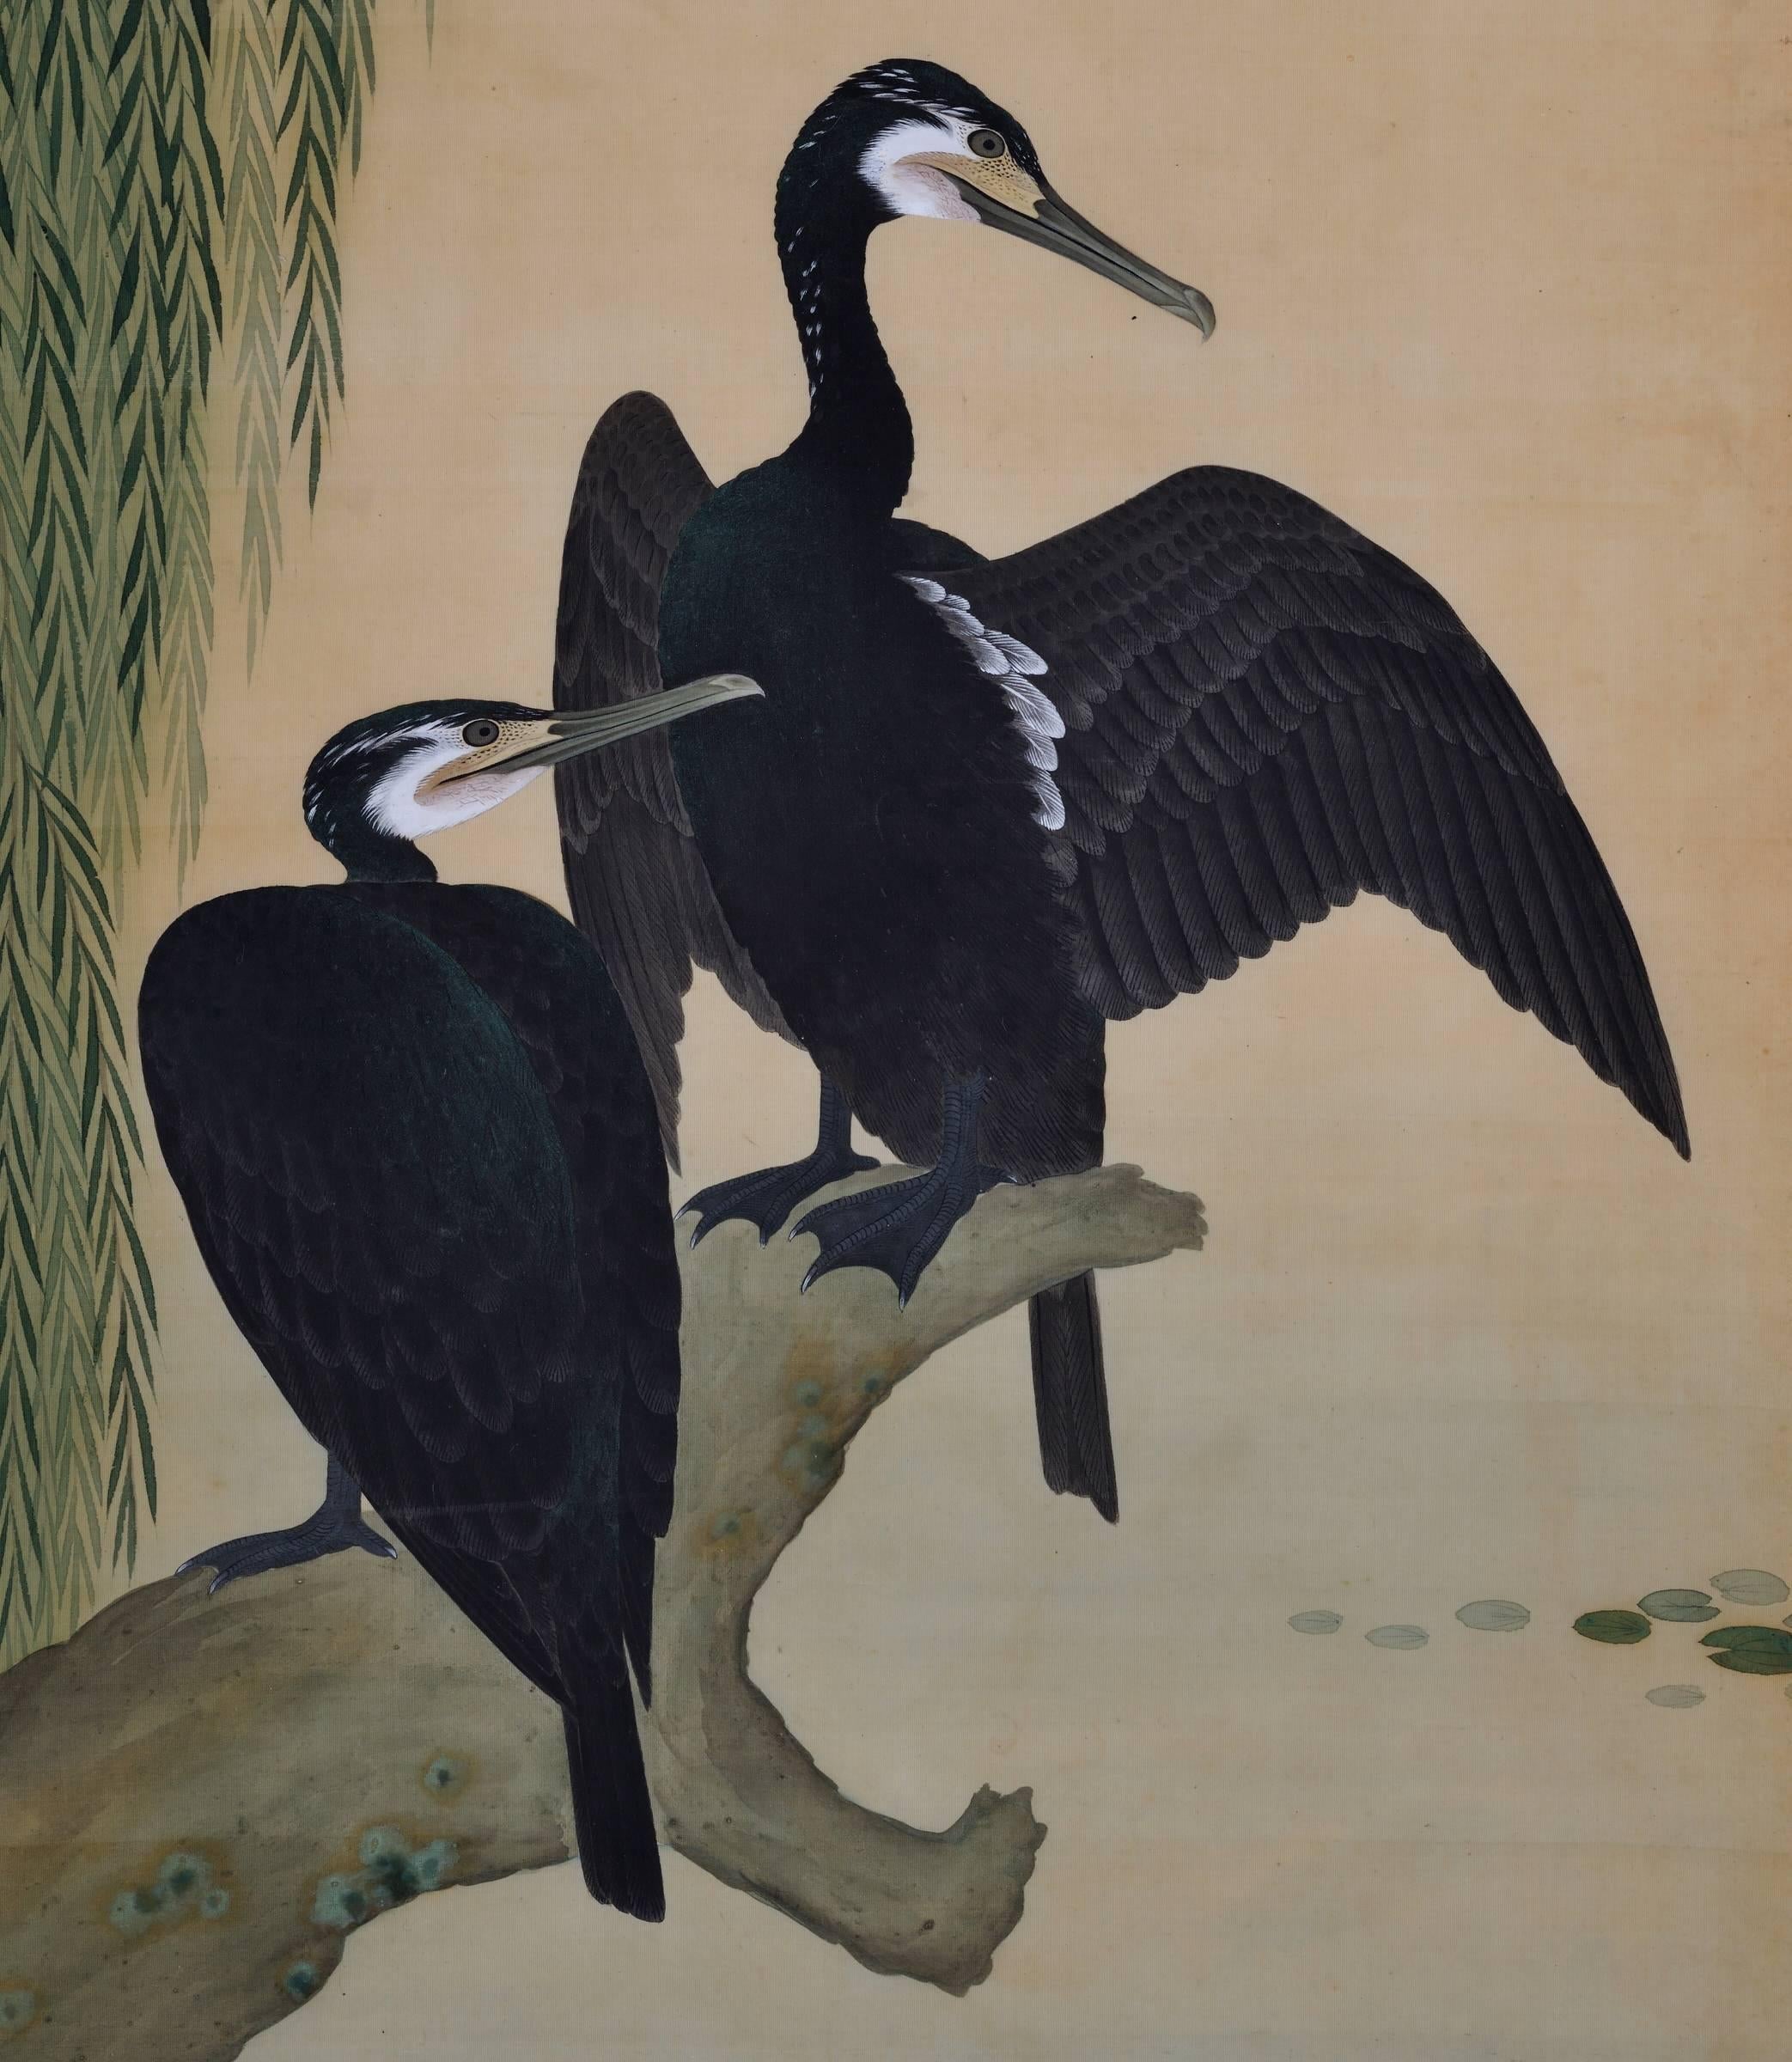 Takakura Zaiko (fl.1854-1860)

Birds and flowers of the seasons

Cormorants and willows

Ink and color on silk

Seal: Taka Zaiko no in 

Dimensions:

H 39” x W 16.5” (100 cm x 42.5 cm)

Bird and flower paintings by the artist Takakura Zaiko. Each